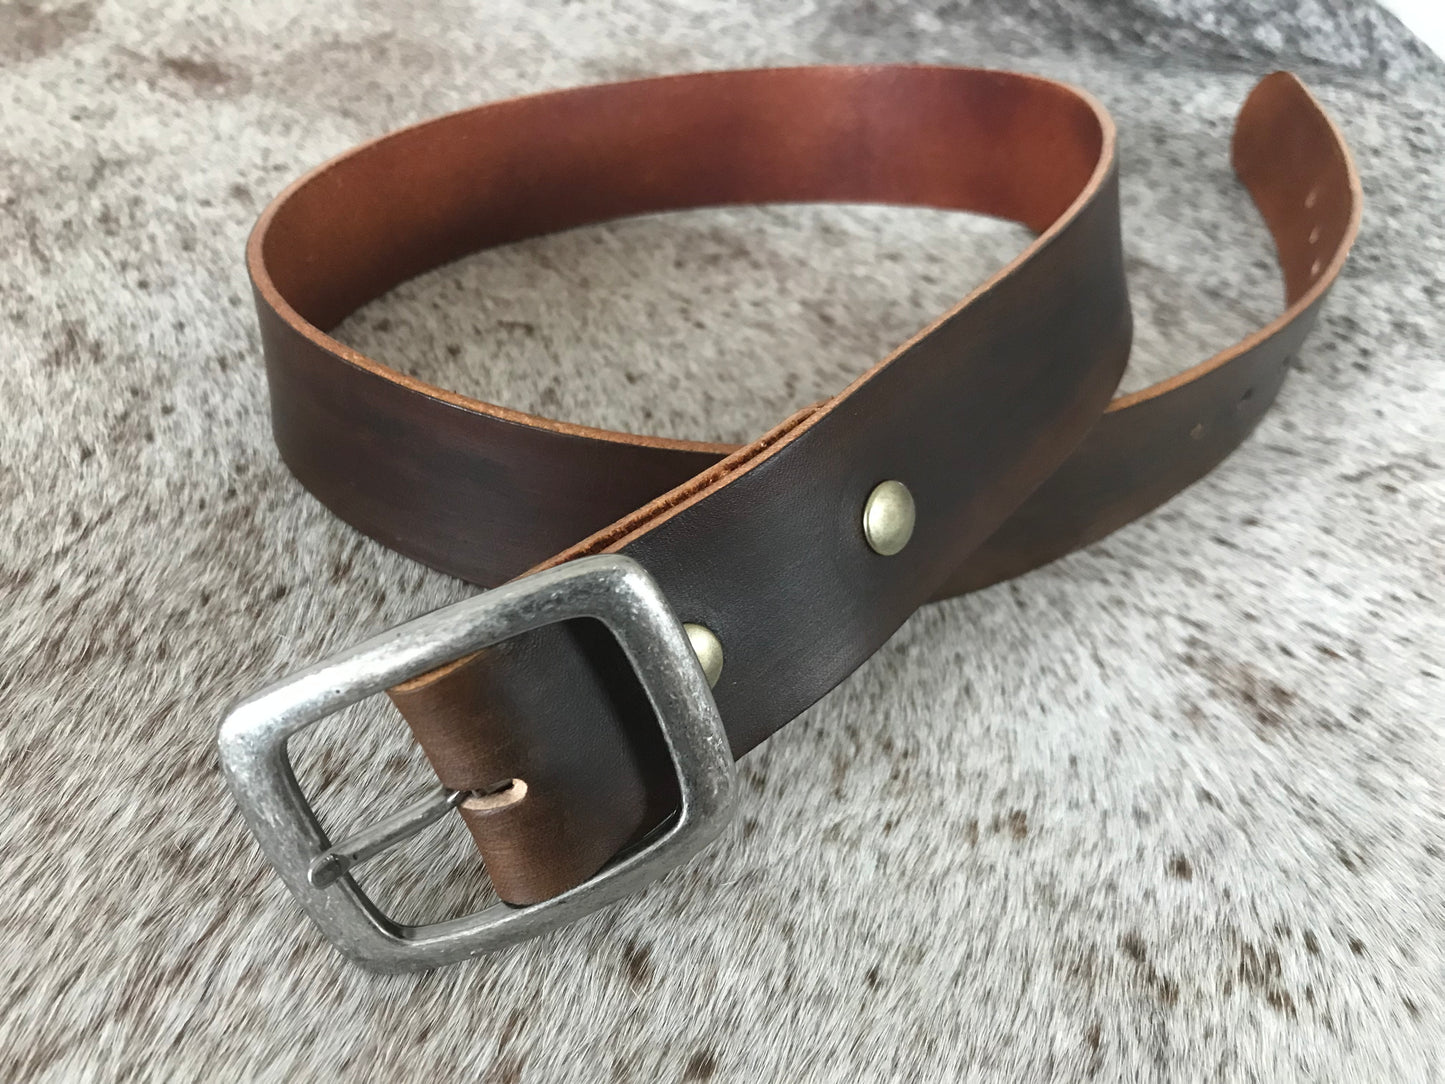 Hand dyed leather belt with antique buckle